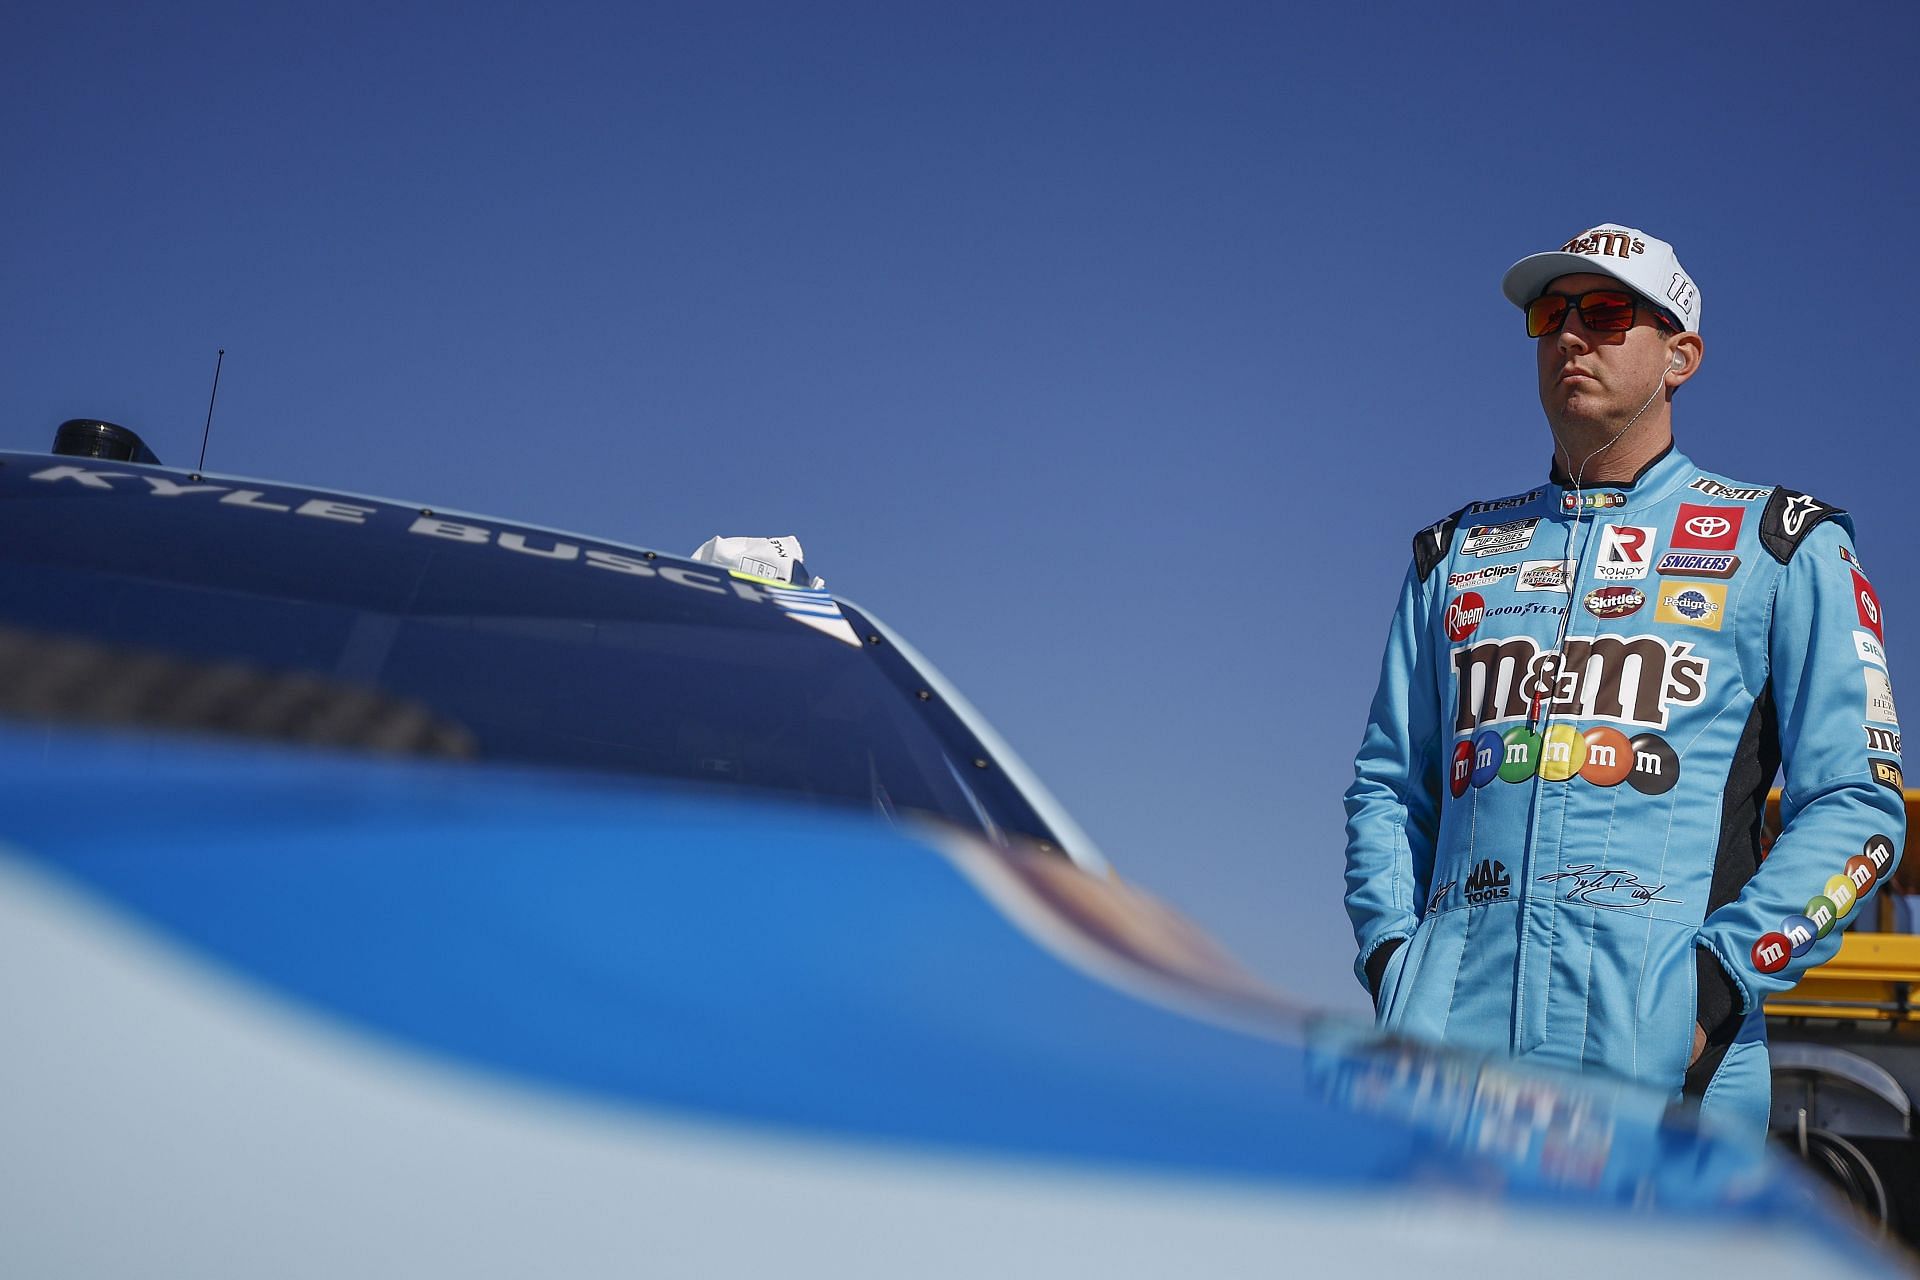 Kyle Busch waits on the grid during practice for the NASCAR Cup Series Toyota Owners 400 at Richmond Raceway.